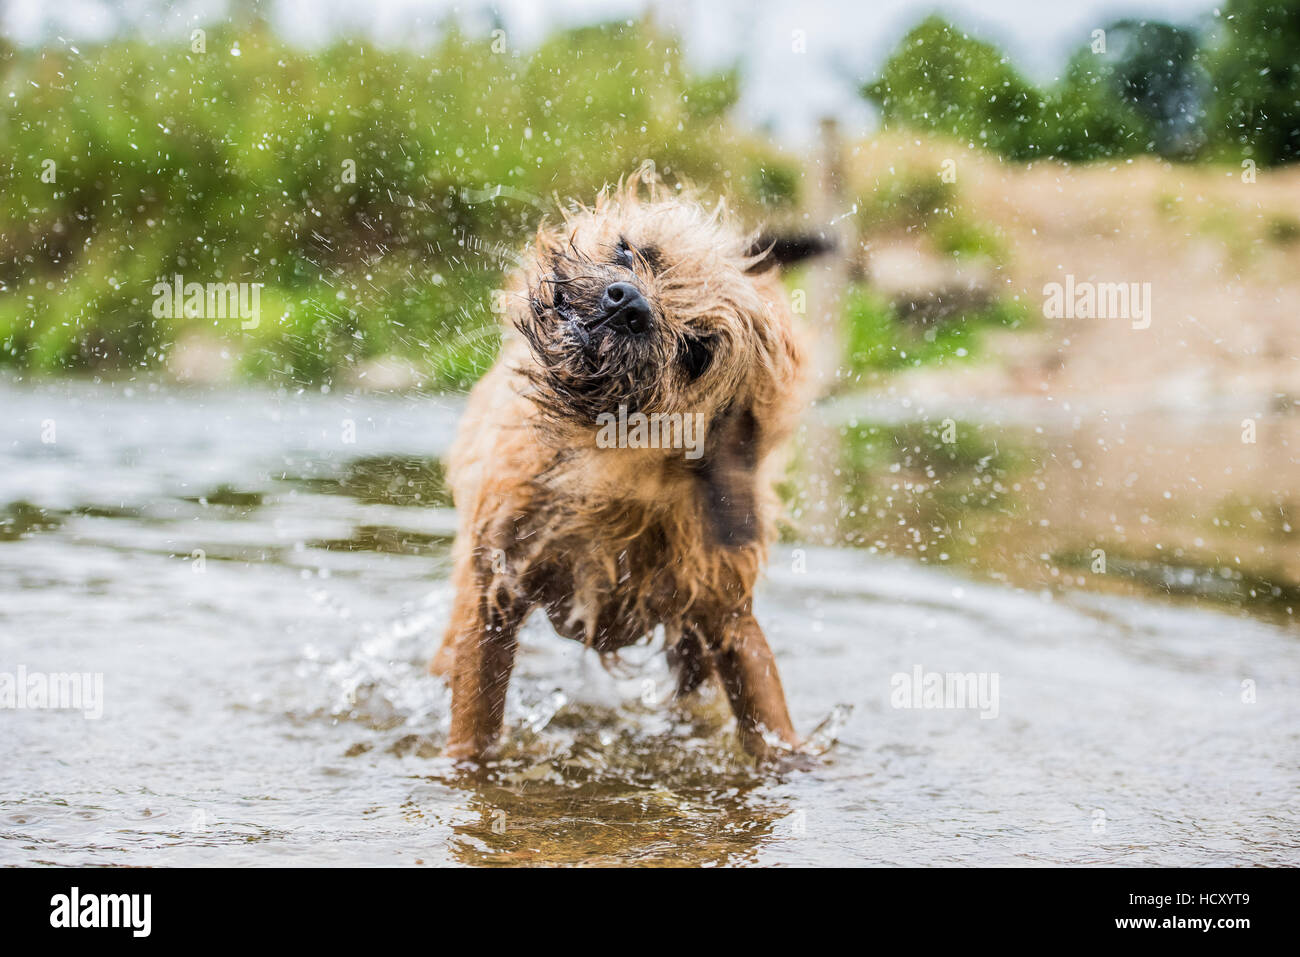 A briard dog, wading in water, UK Stock Photo